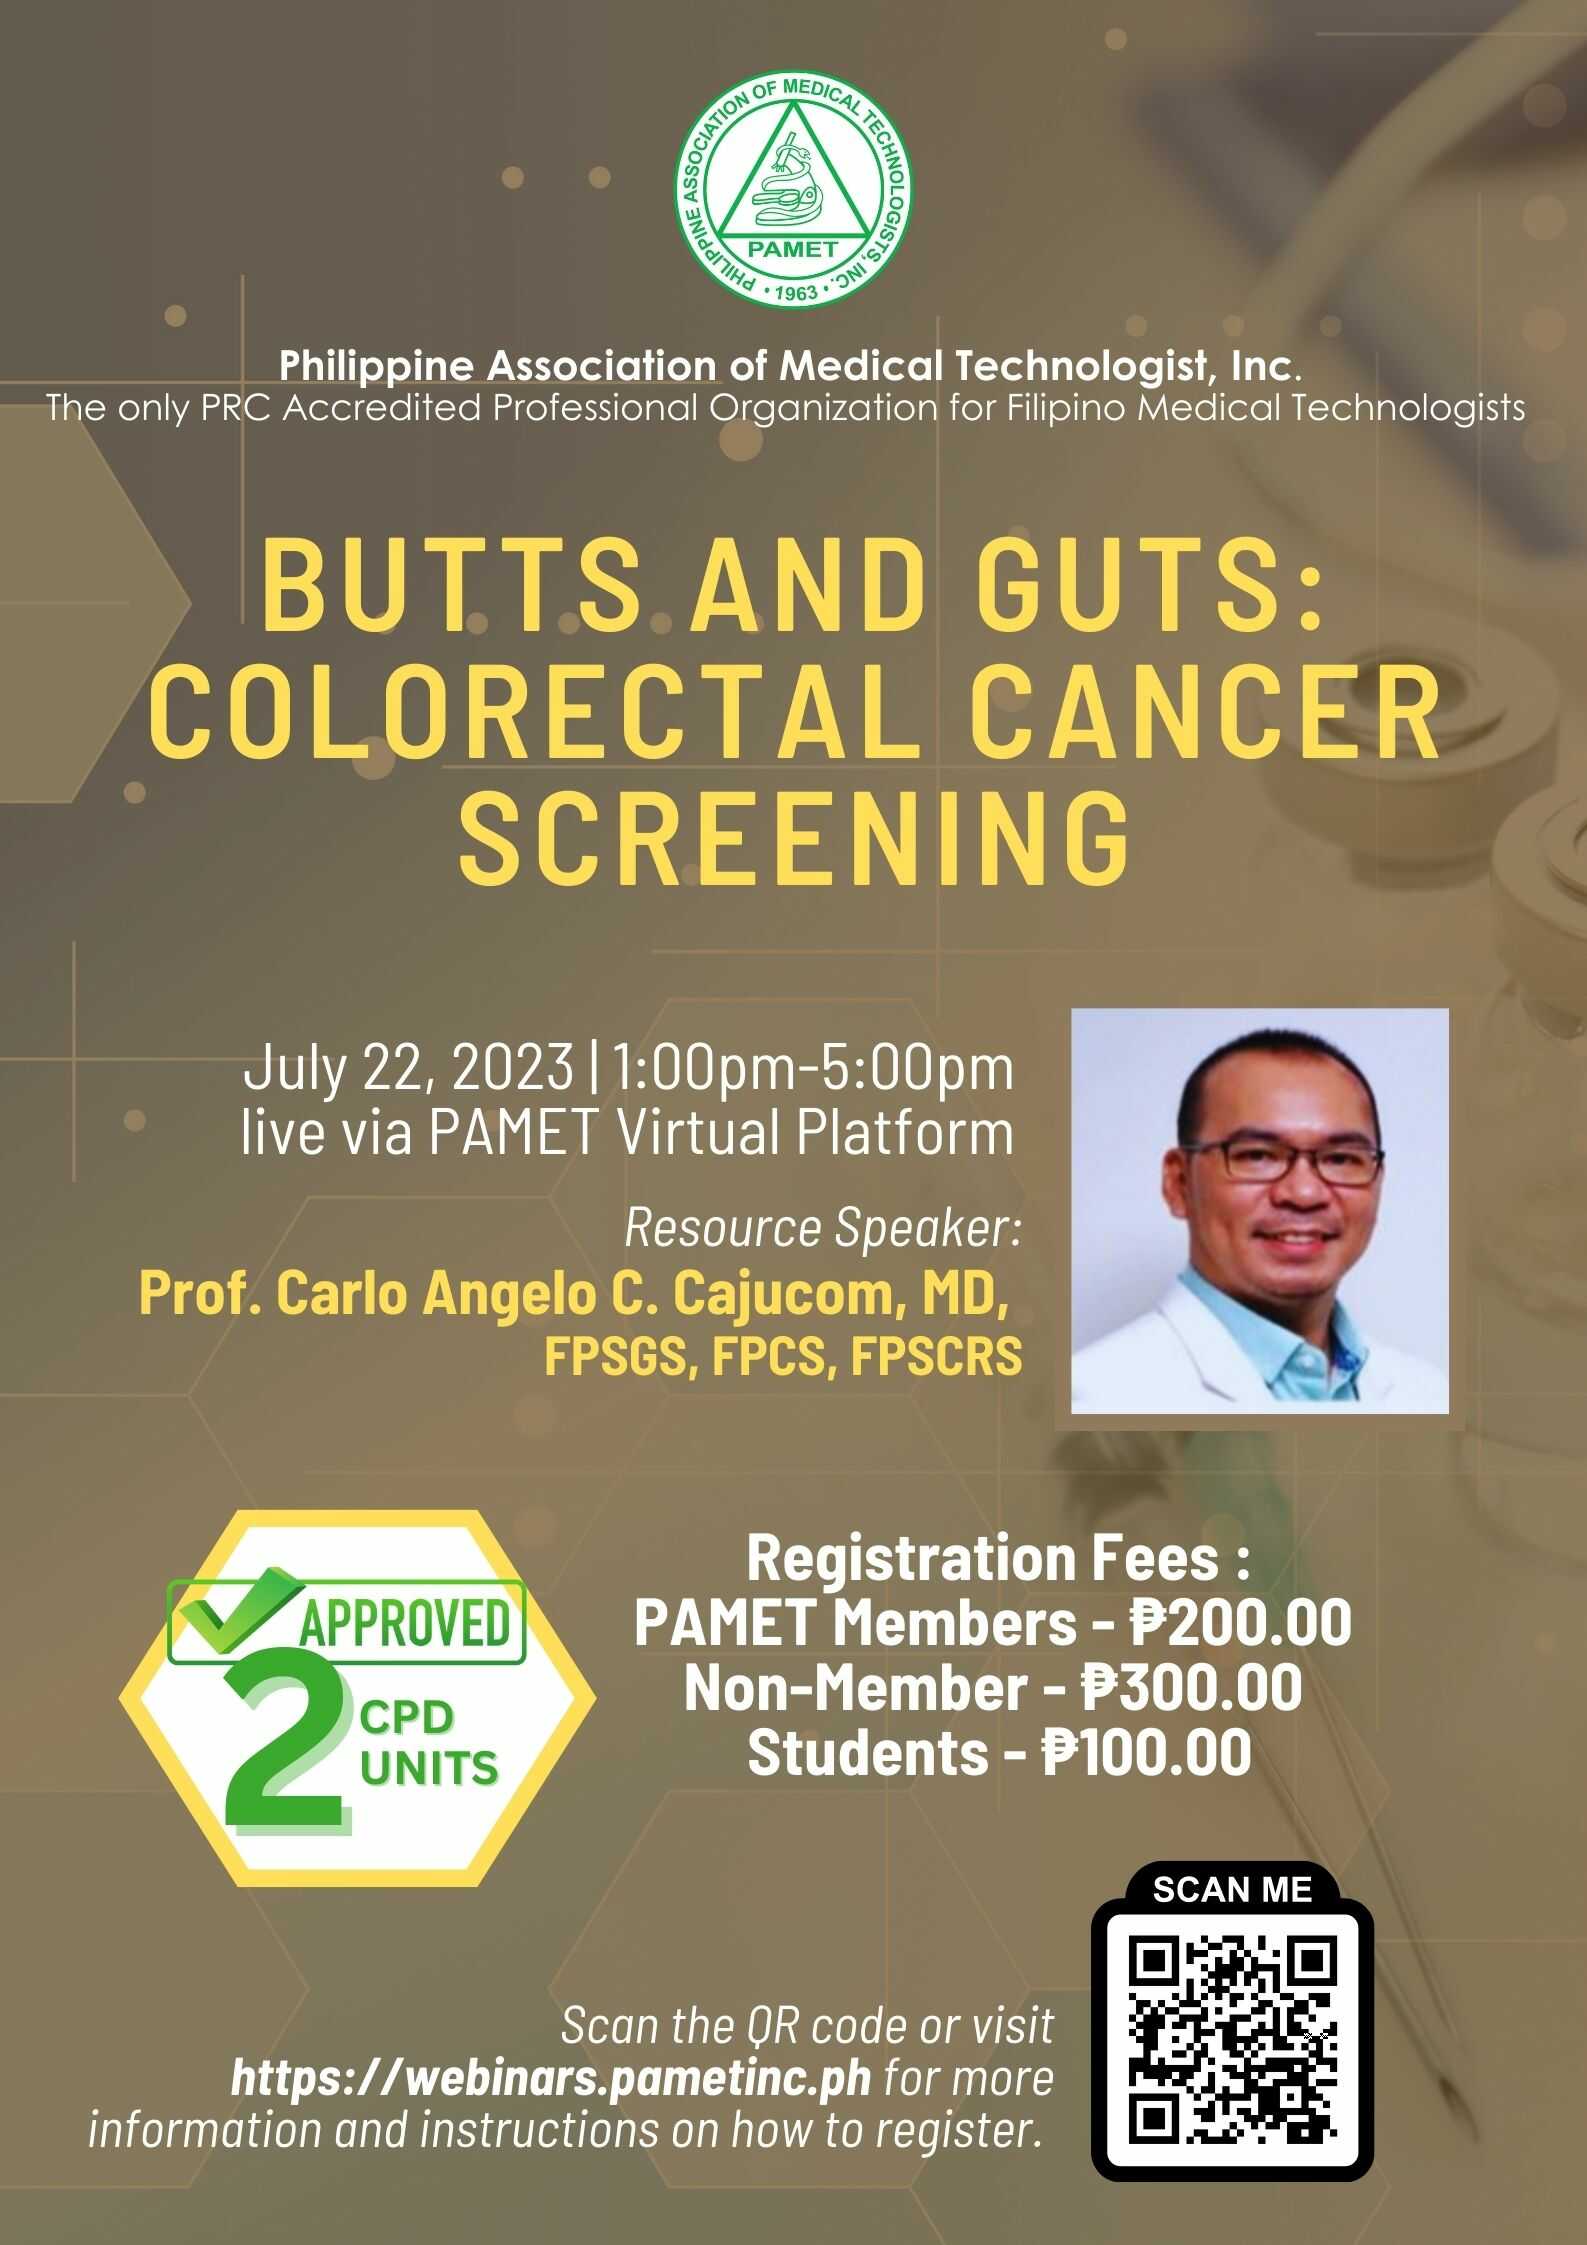 Butts and Guts: Colorectal Cancer Screening